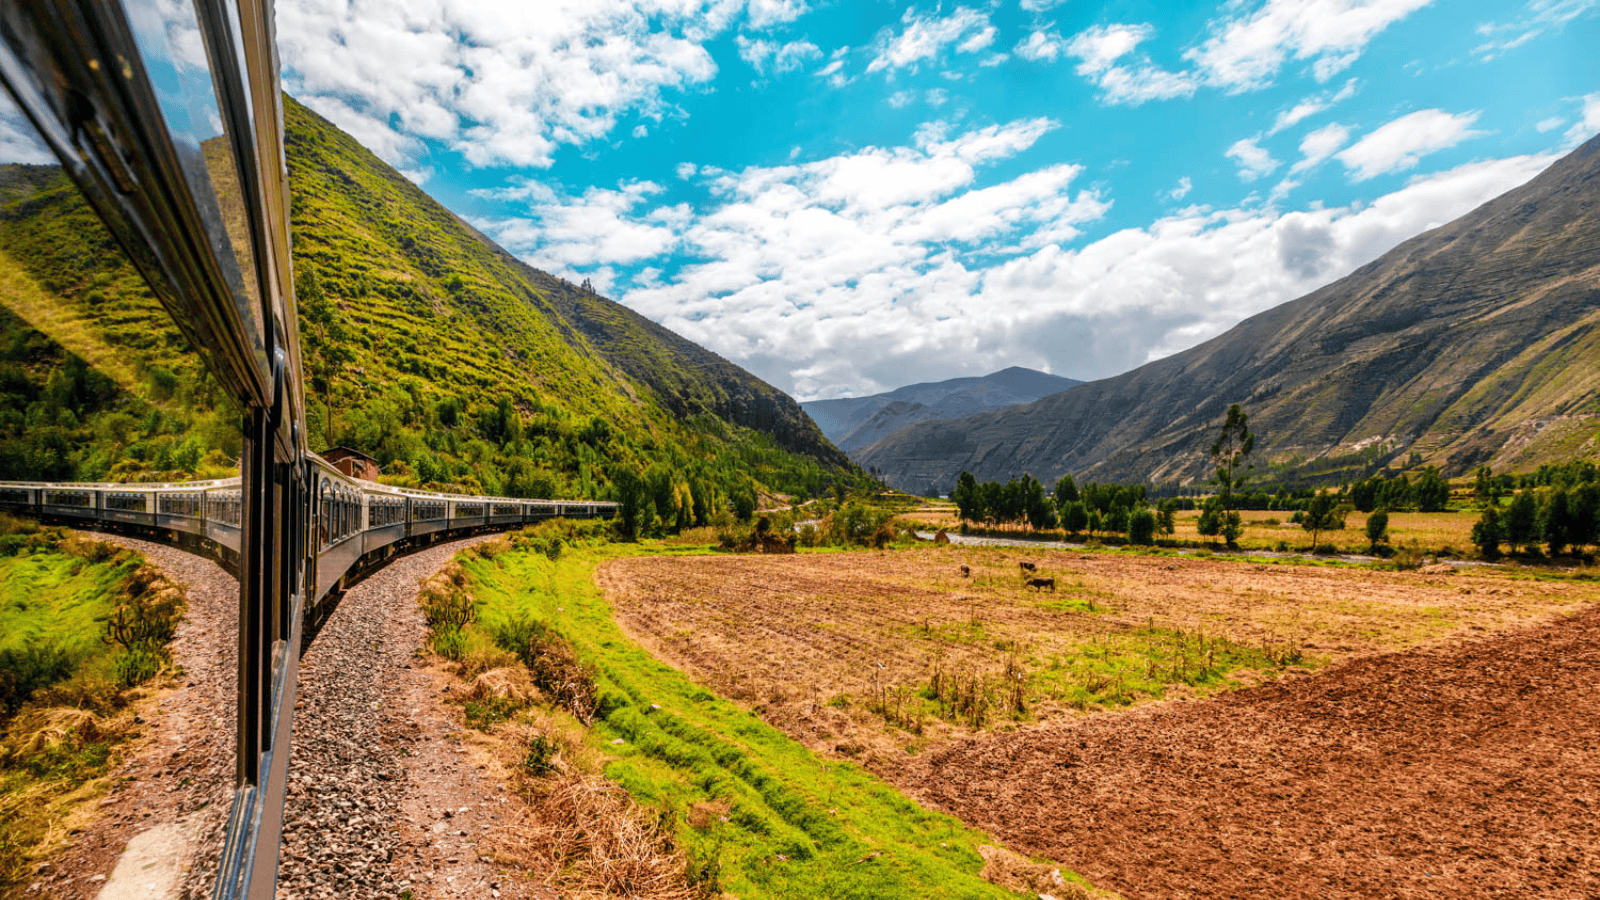 <p>Consider booking a ride on the <a href="https://www.belmond.com/trains/south-america/peru/belmond-andean-explorer/" rel="nofollow external noopener noreferrer">Andean Explorer</a> during your next trip to Peru. The Andean Explorer is a luxurious South American train highlighting spectacular Peruvian sights like Cusco and Lake Titicaca.</p><p>Each journey aboard the Andean Explorer promises an unbelievable adventure. Travel through the breathtaking Andes Mountains and create priceless memories. Along the way, you’ll have the opportunity to visit historically significant sites and charming Peruvian towns.</p>